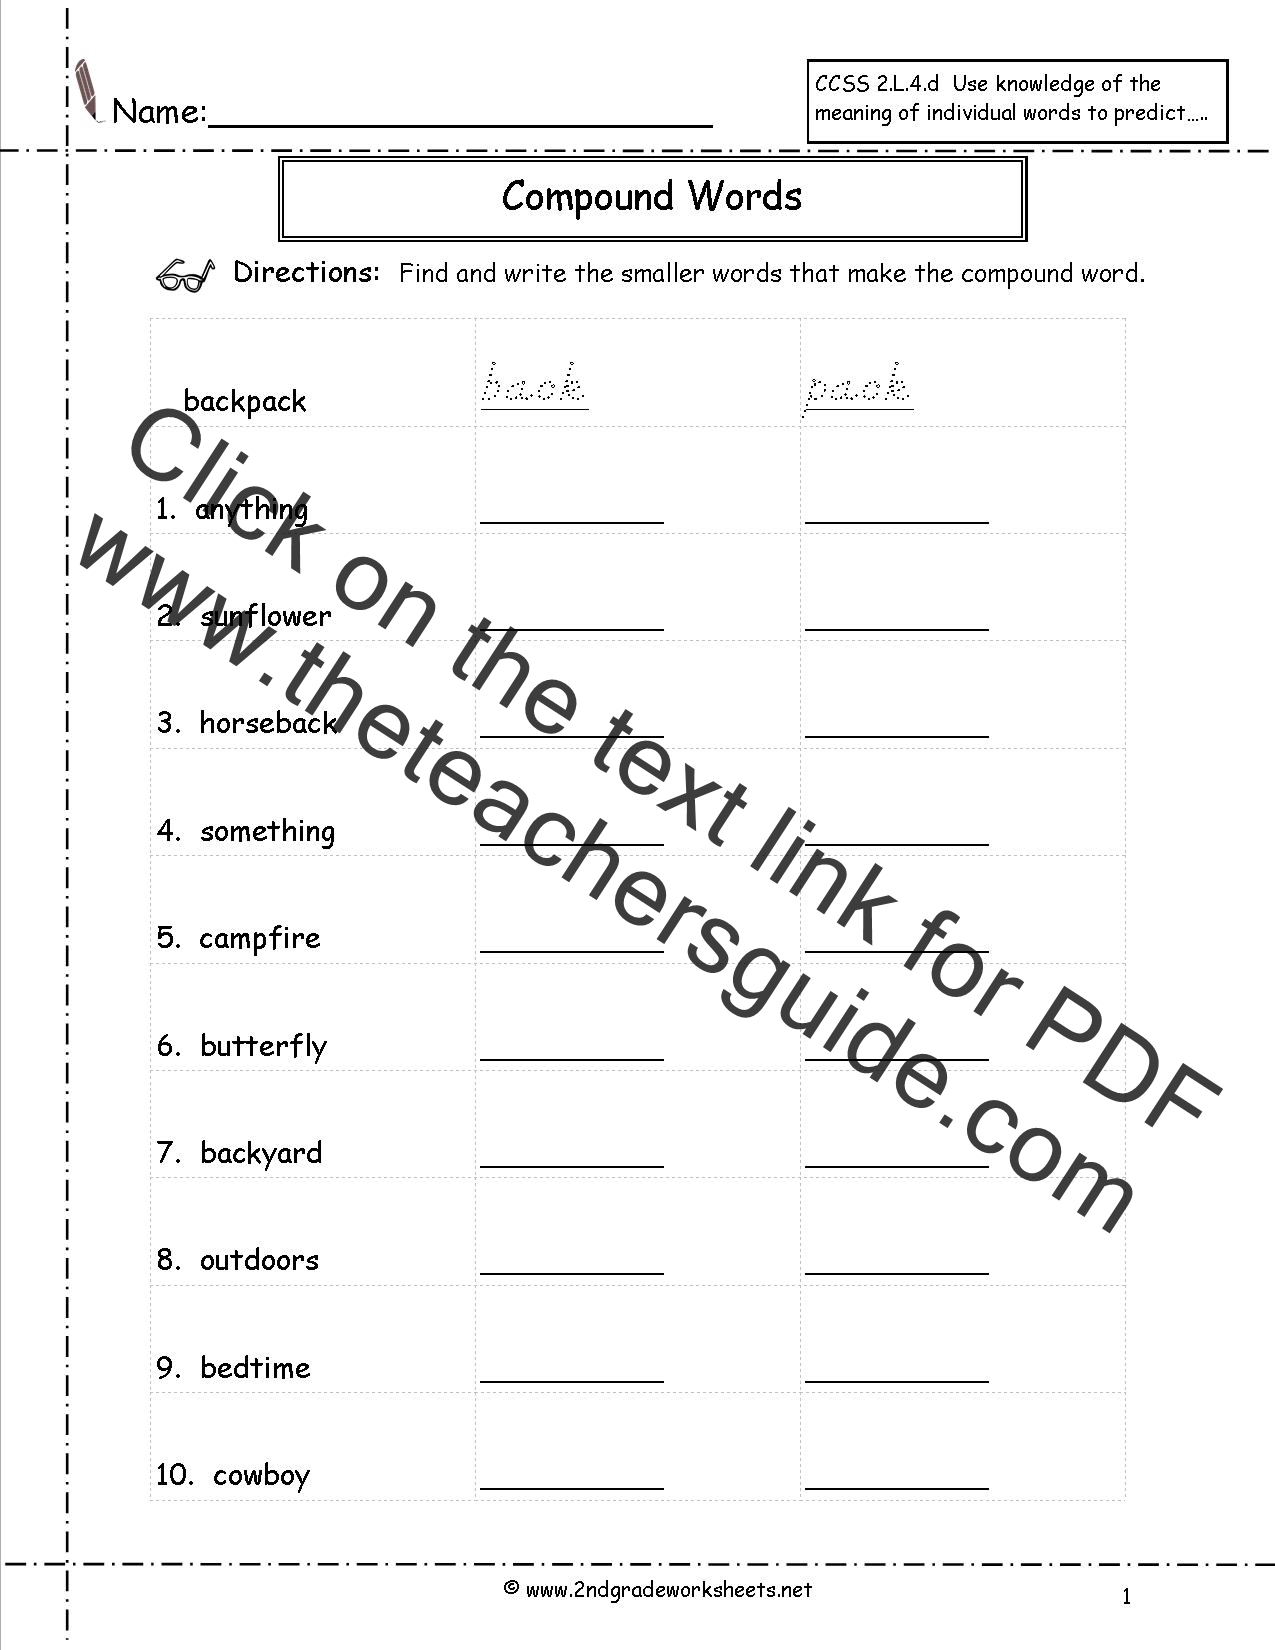 compound-words-worksheets